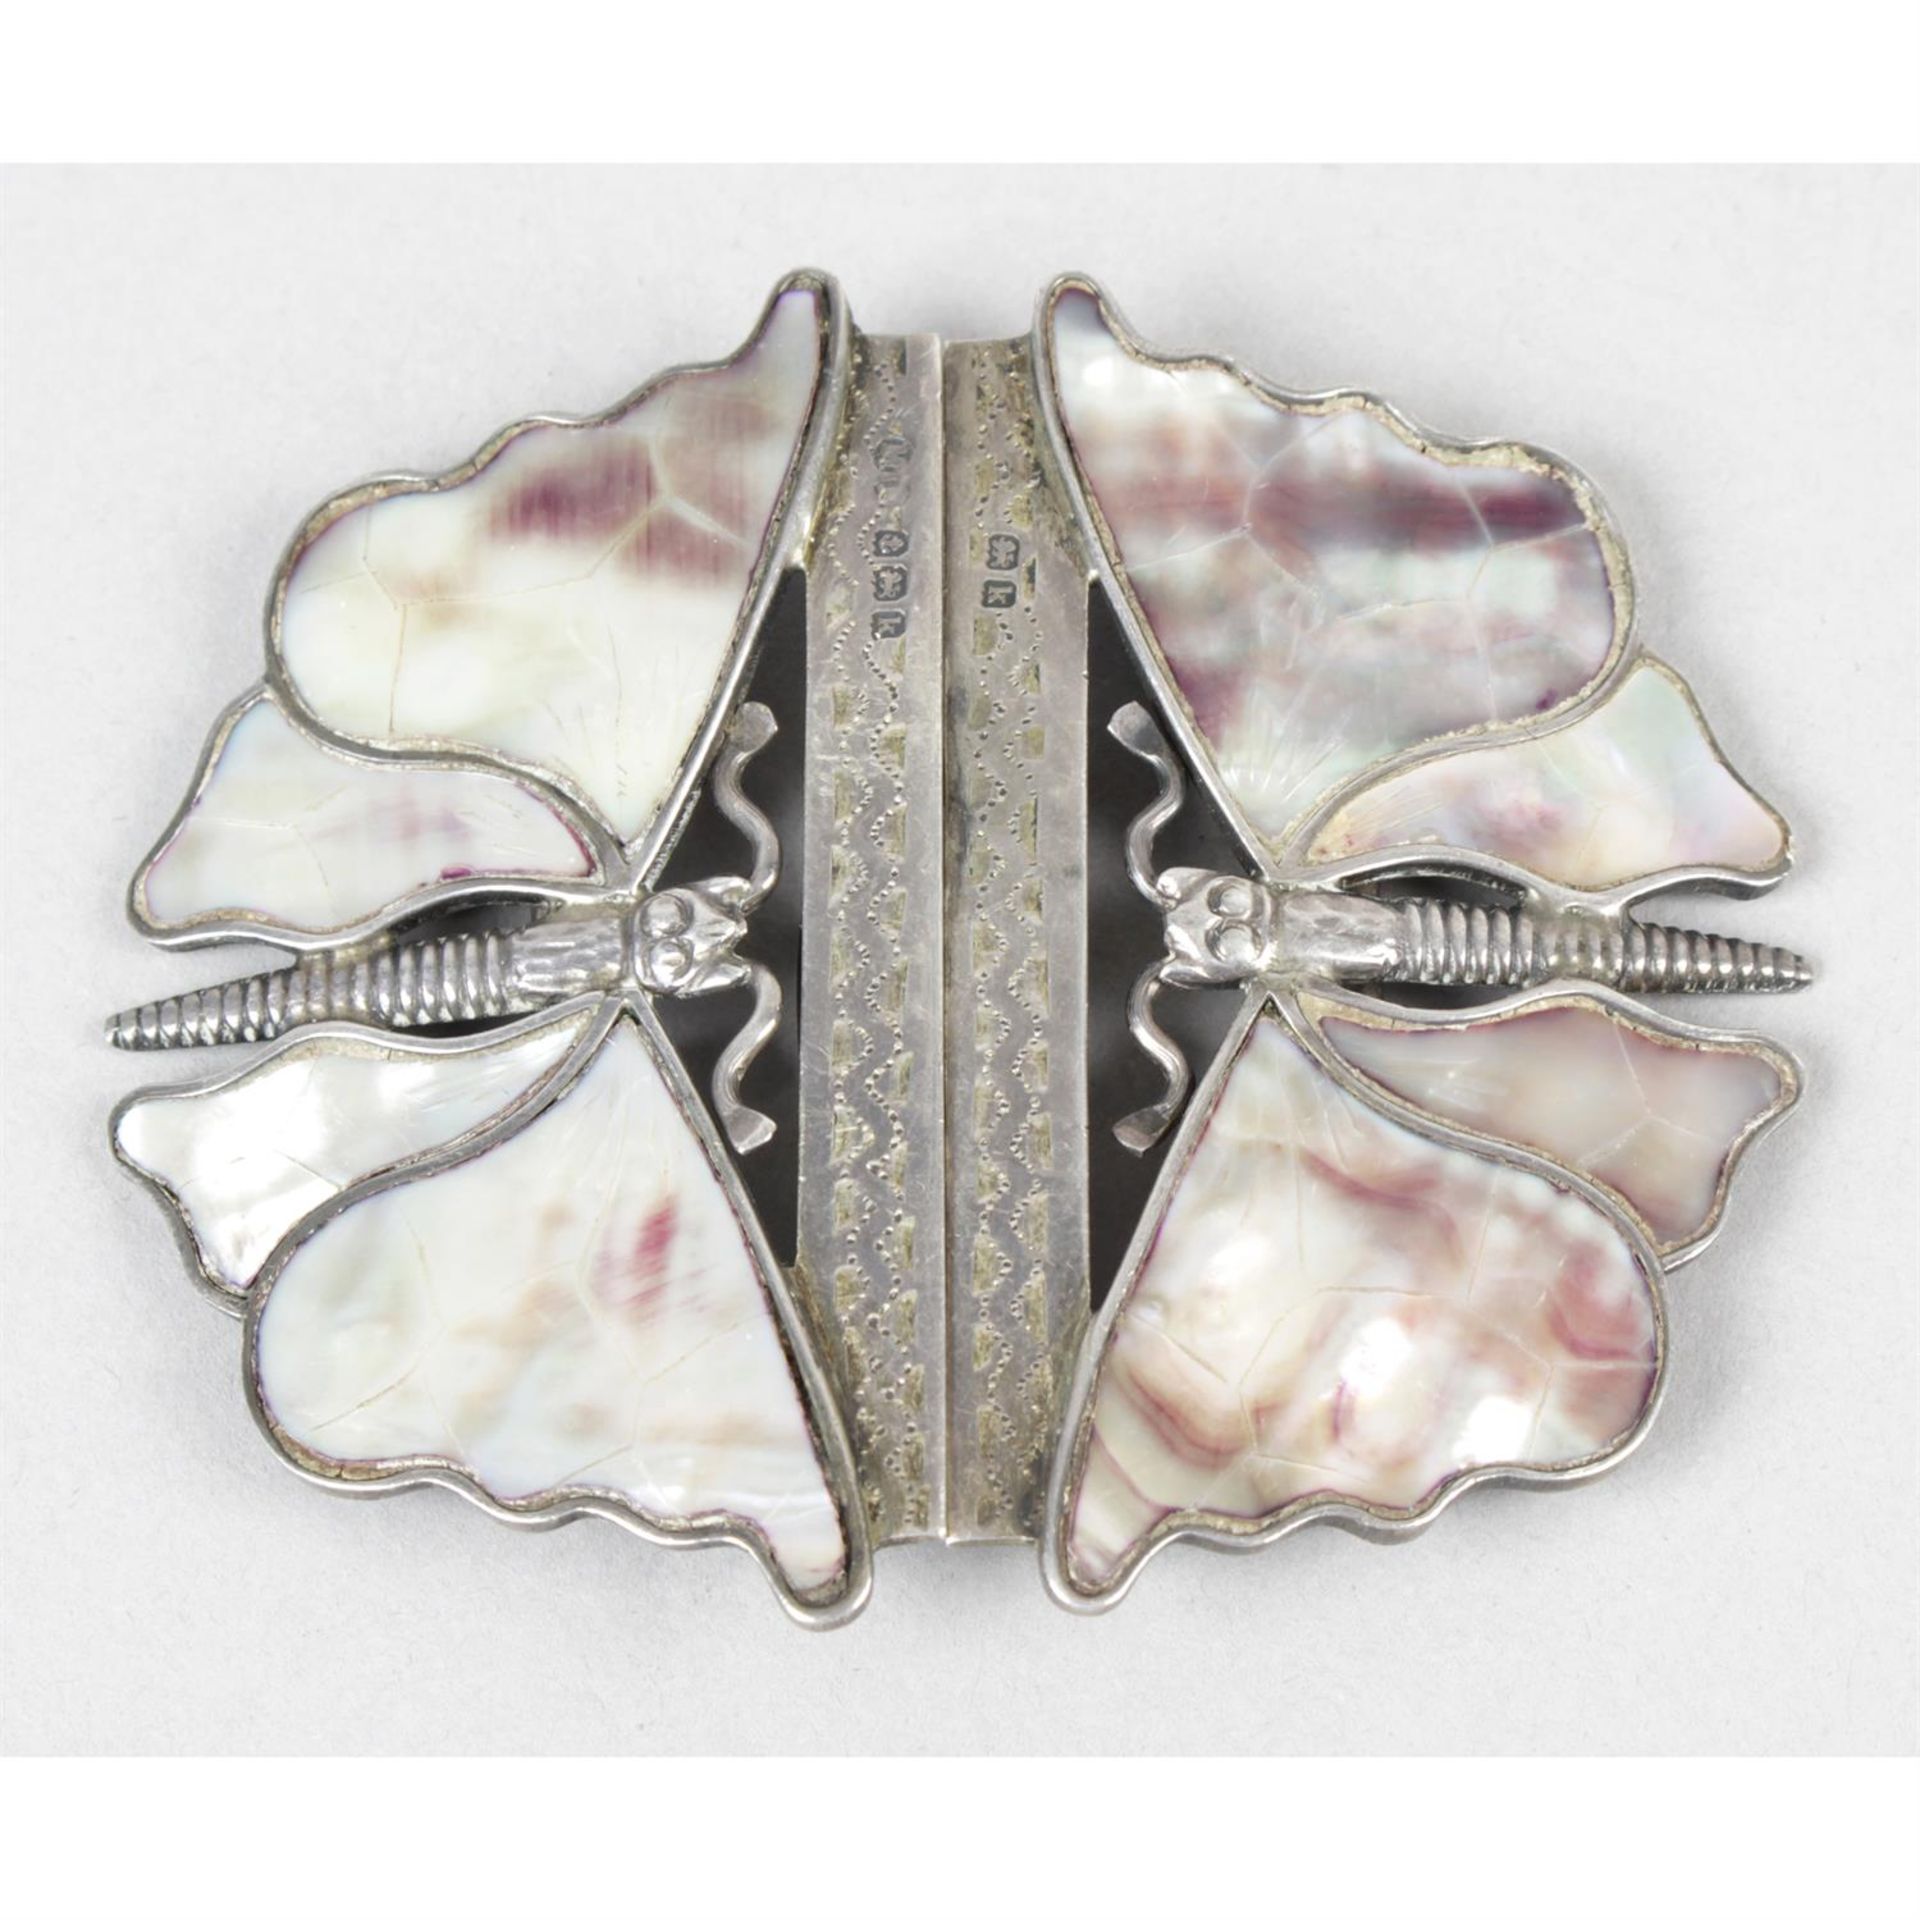 An Edwardian silver and mother-of-pearl buckle.